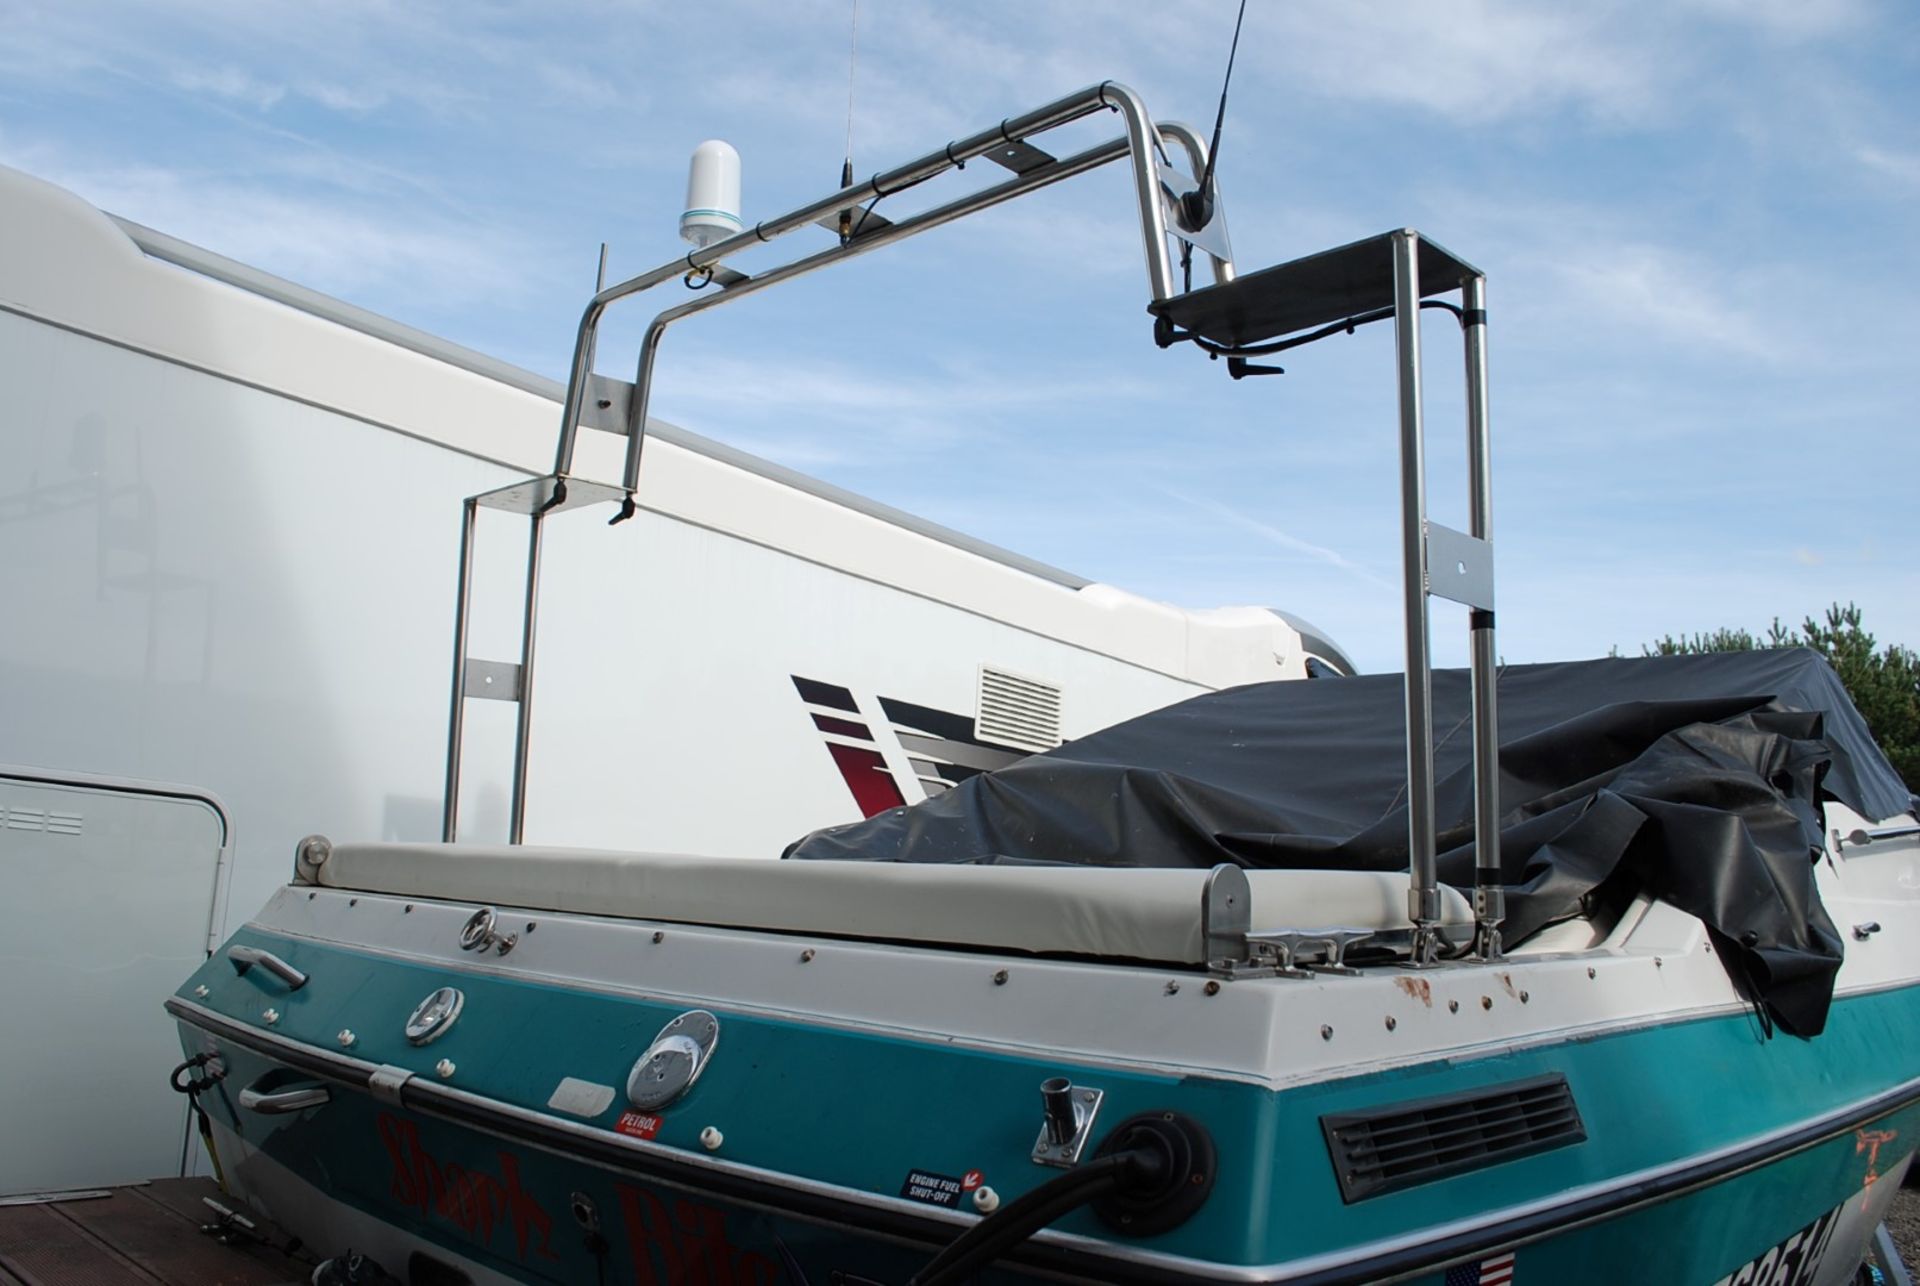 1 x "Sealiner 2002" 20ft Cuddy Outboard Engine Boat - Refitted Inside & Out - Includes Trailer - - Image 5 of 38